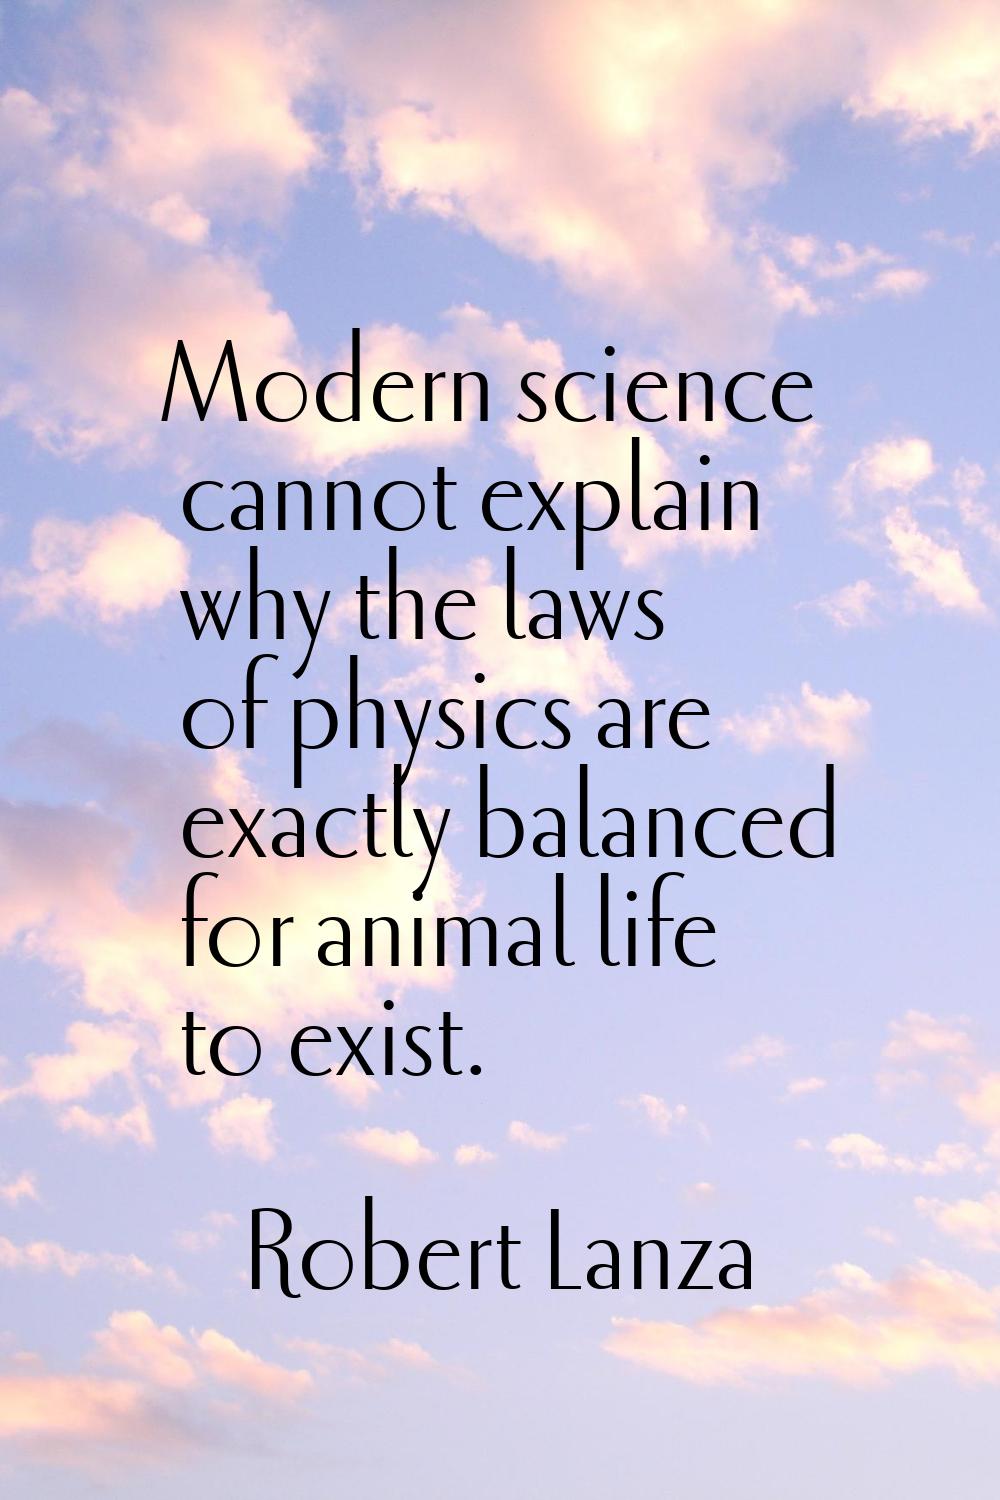 Modern science cannot explain why the laws of physics are exactly balanced for animal life to exist